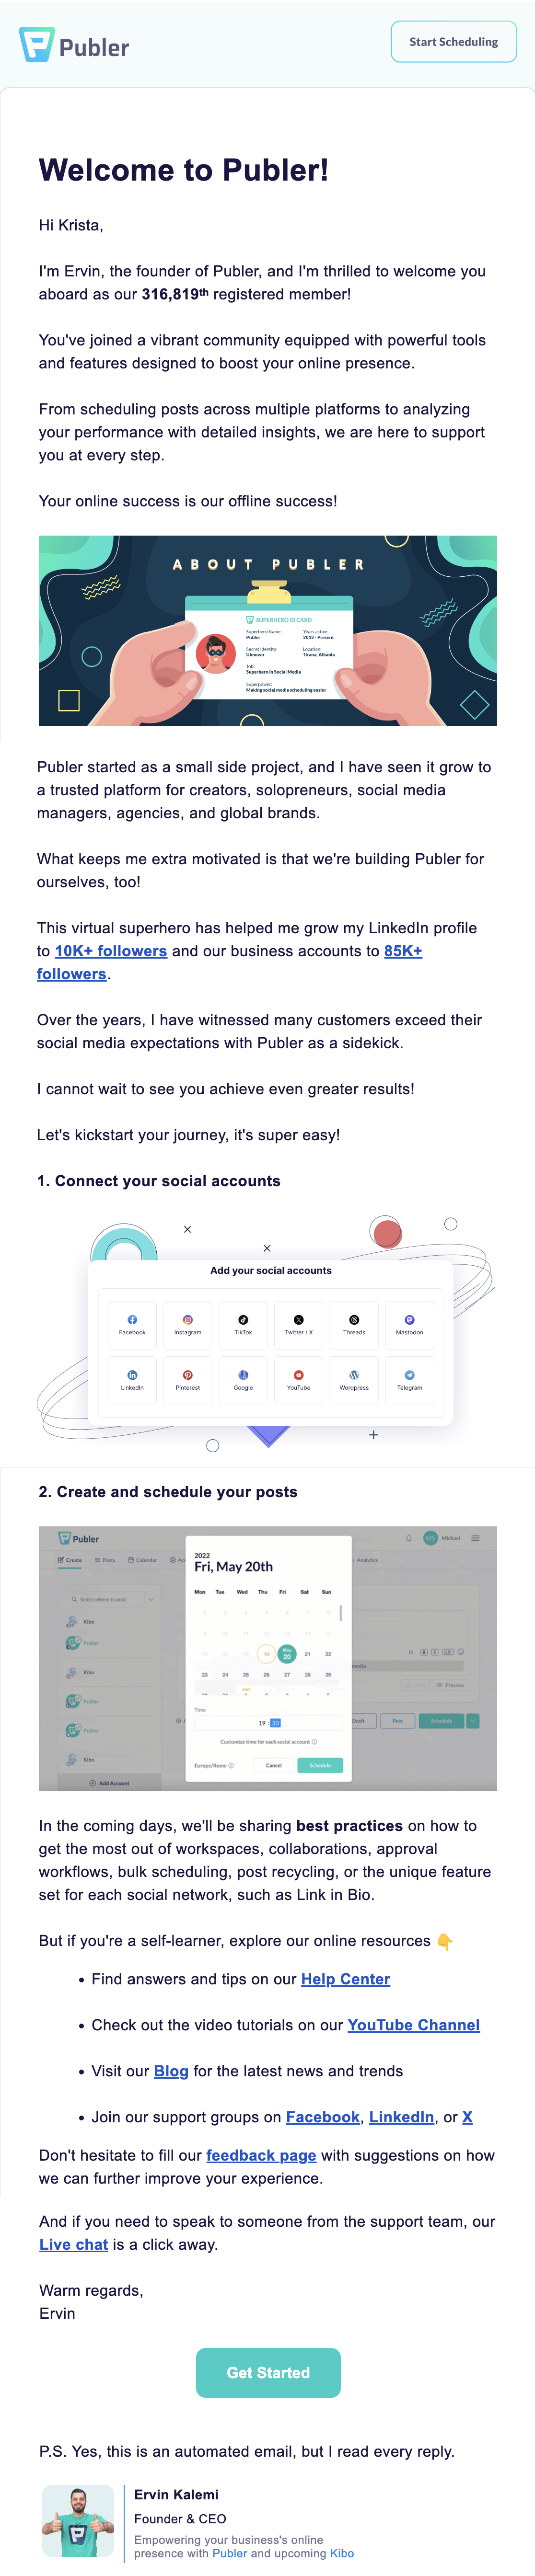 SaaS Welcome Email: Welcome email from Publer